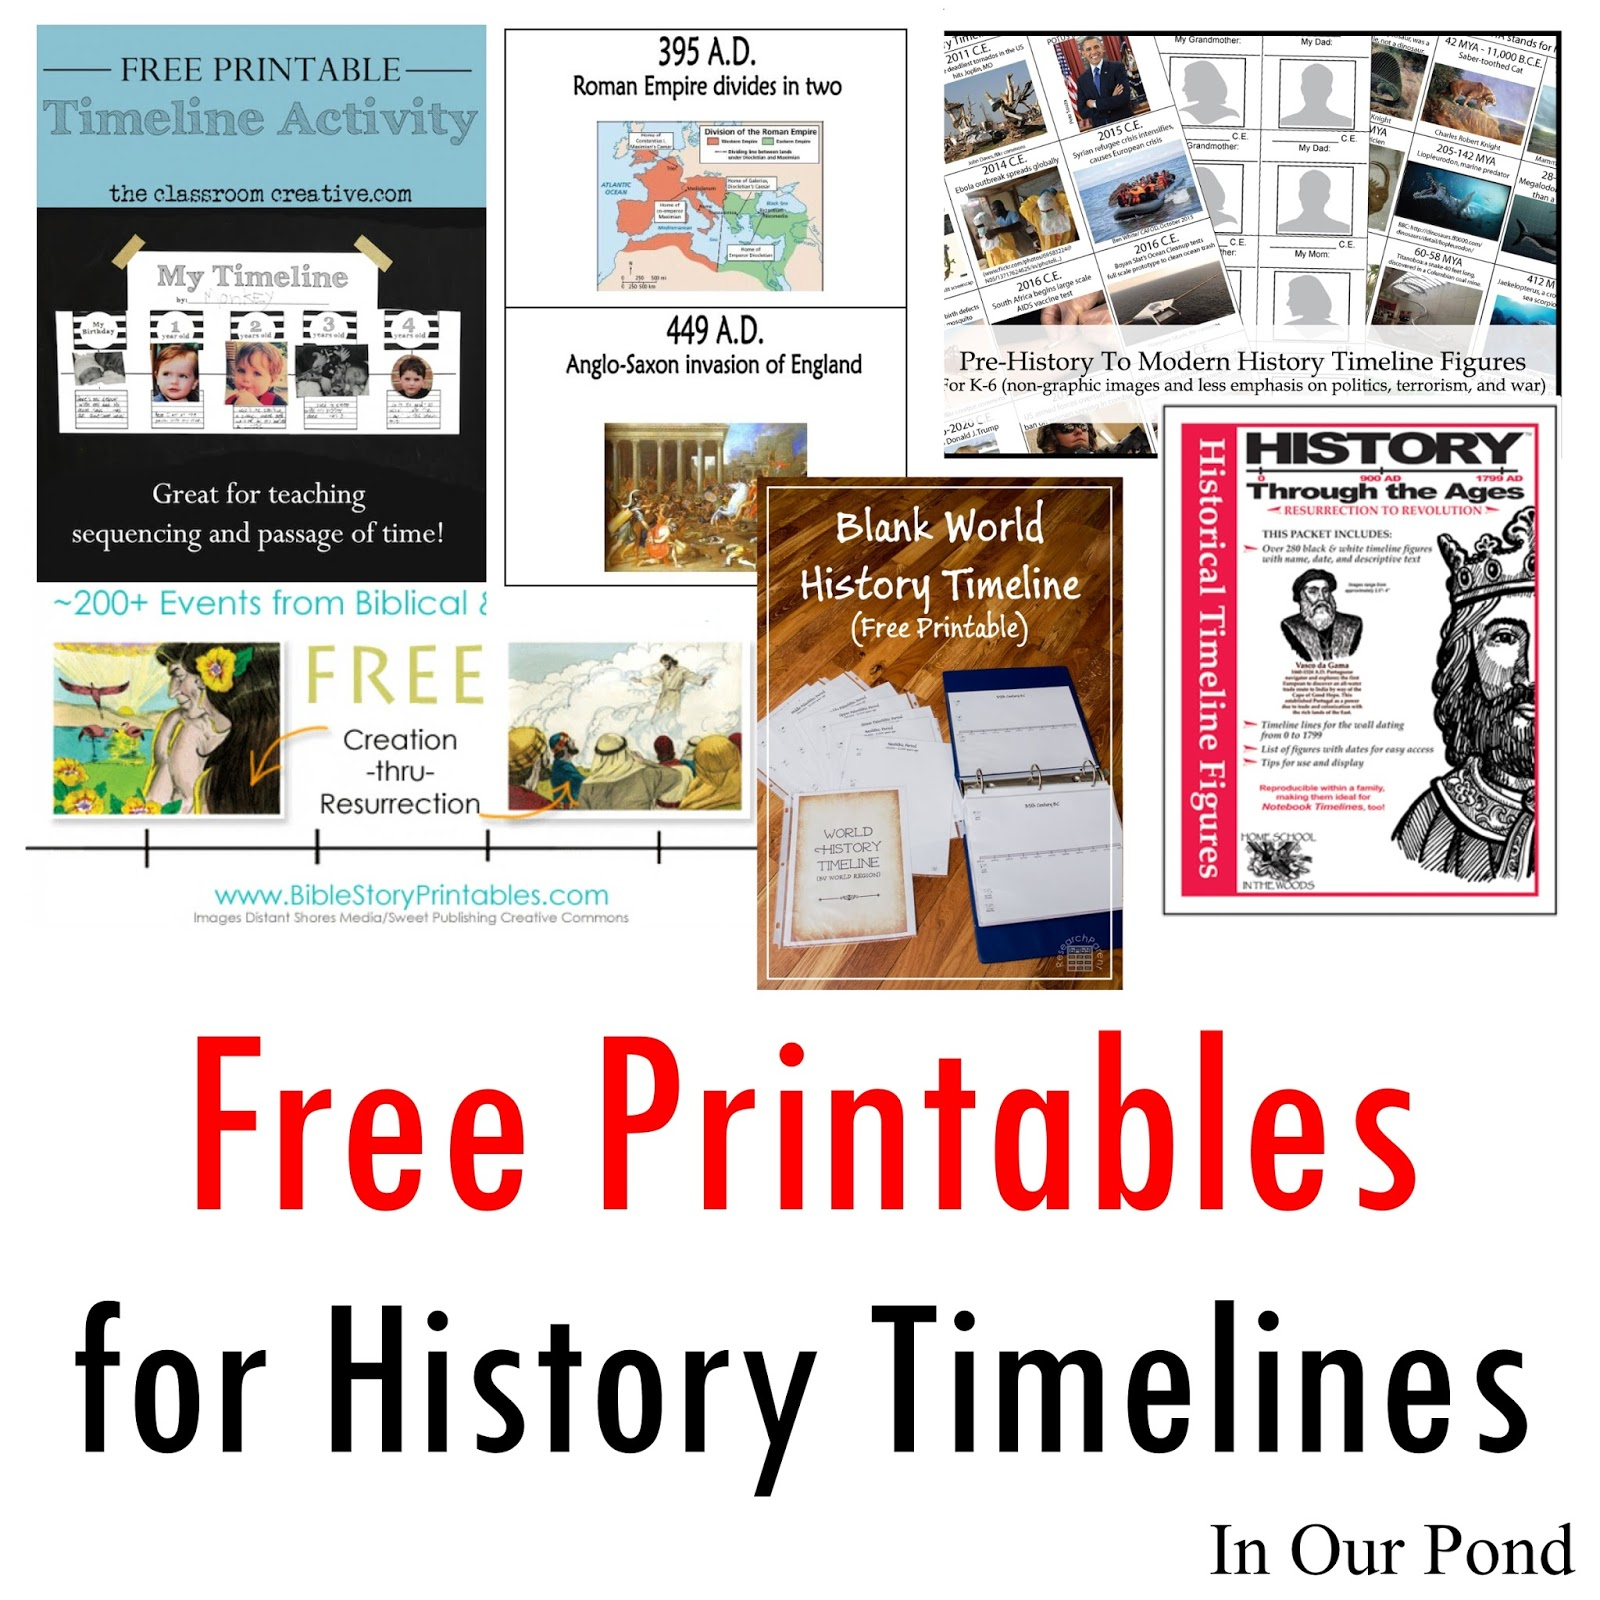 Free Printables For History Timelines - In Our Pond - Free Printable Timeline Figures